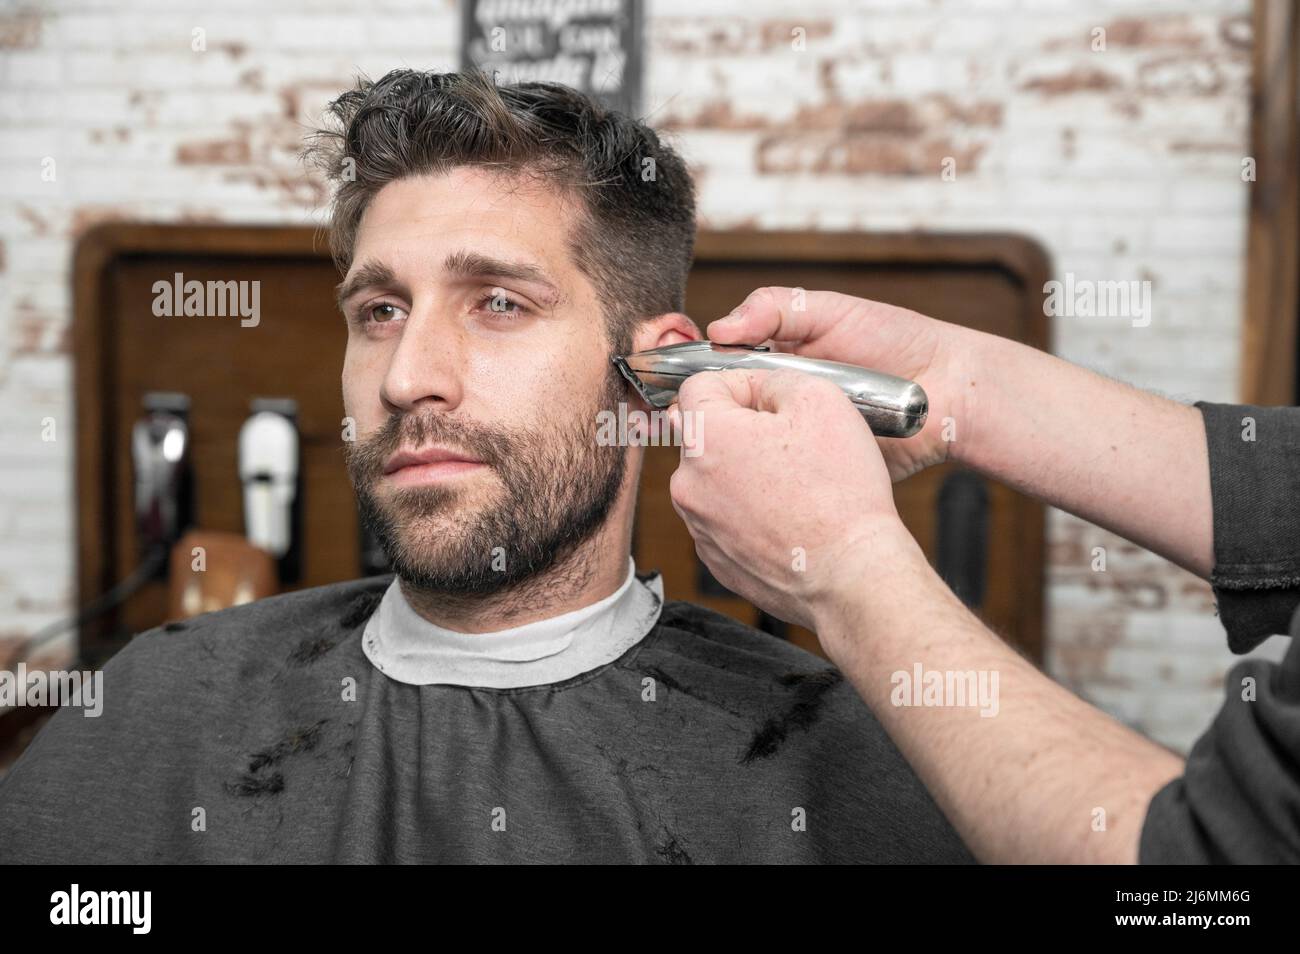 Man barber cutting hair of male client with clipper at barber shop. Hairstyling process. High quality photography. Stock Photo